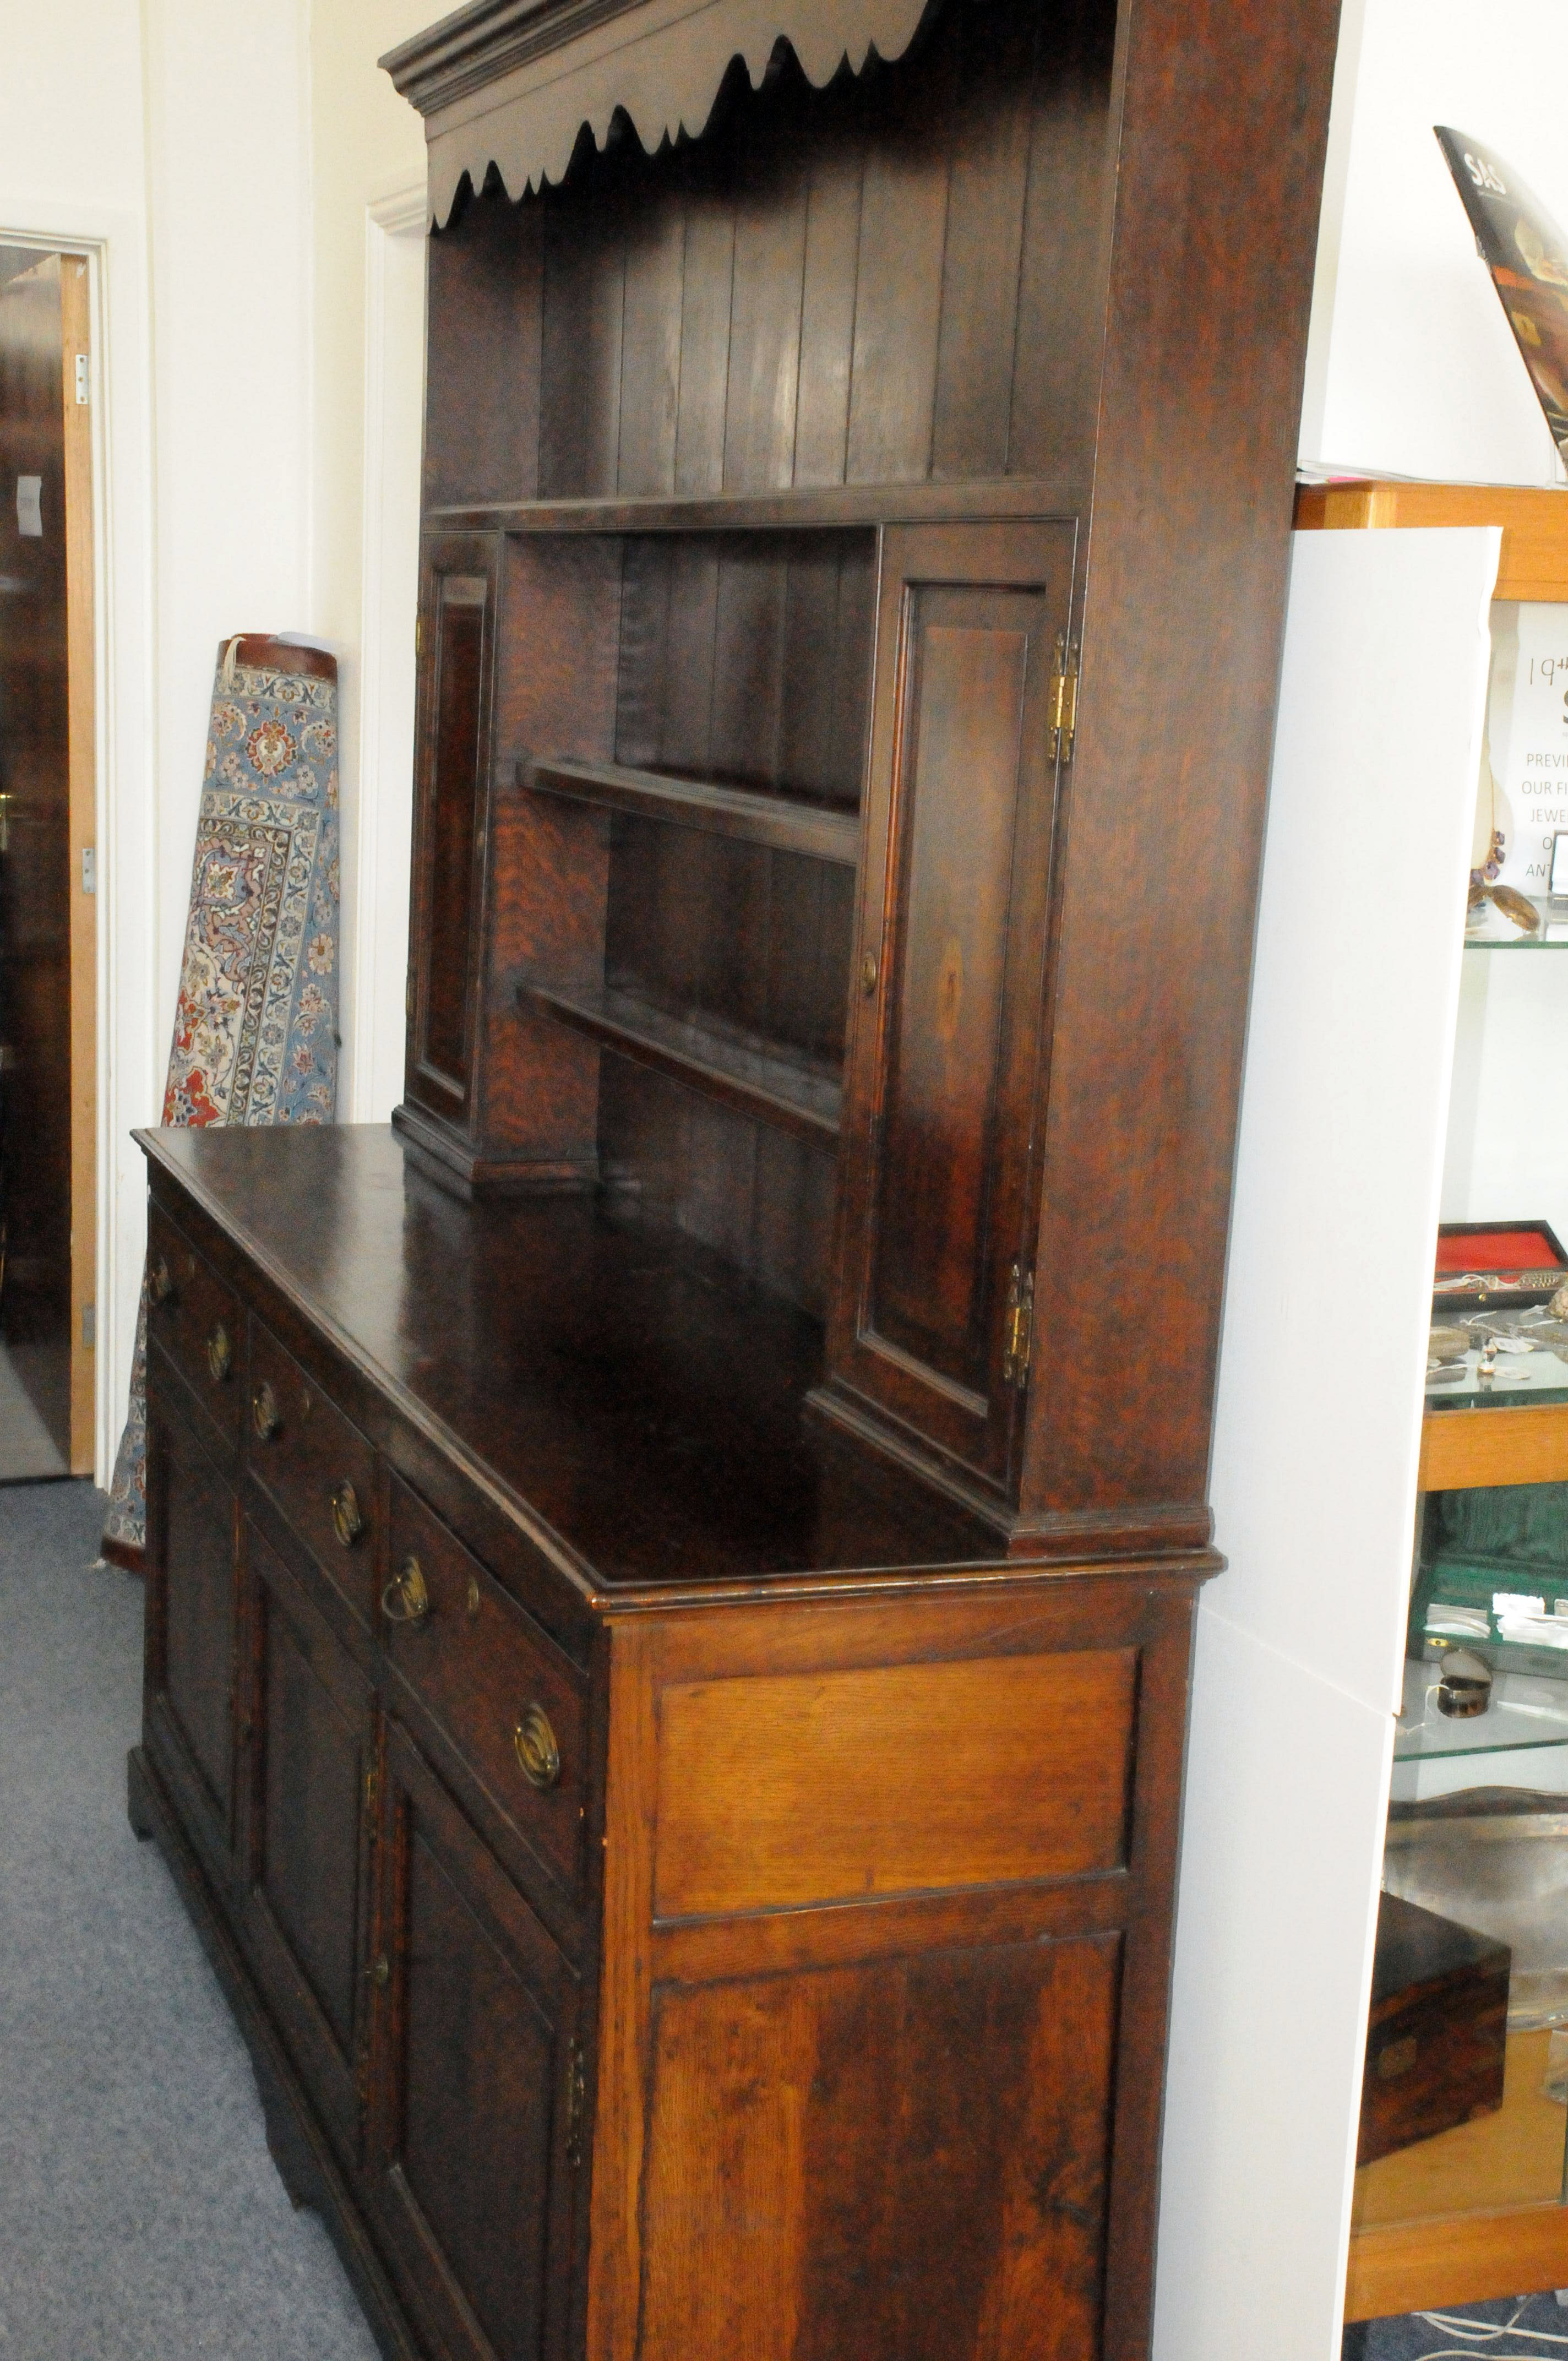 A George III period oak sideboard dresser, the base with three doors and drawers below shelved upper - Image 4 of 5